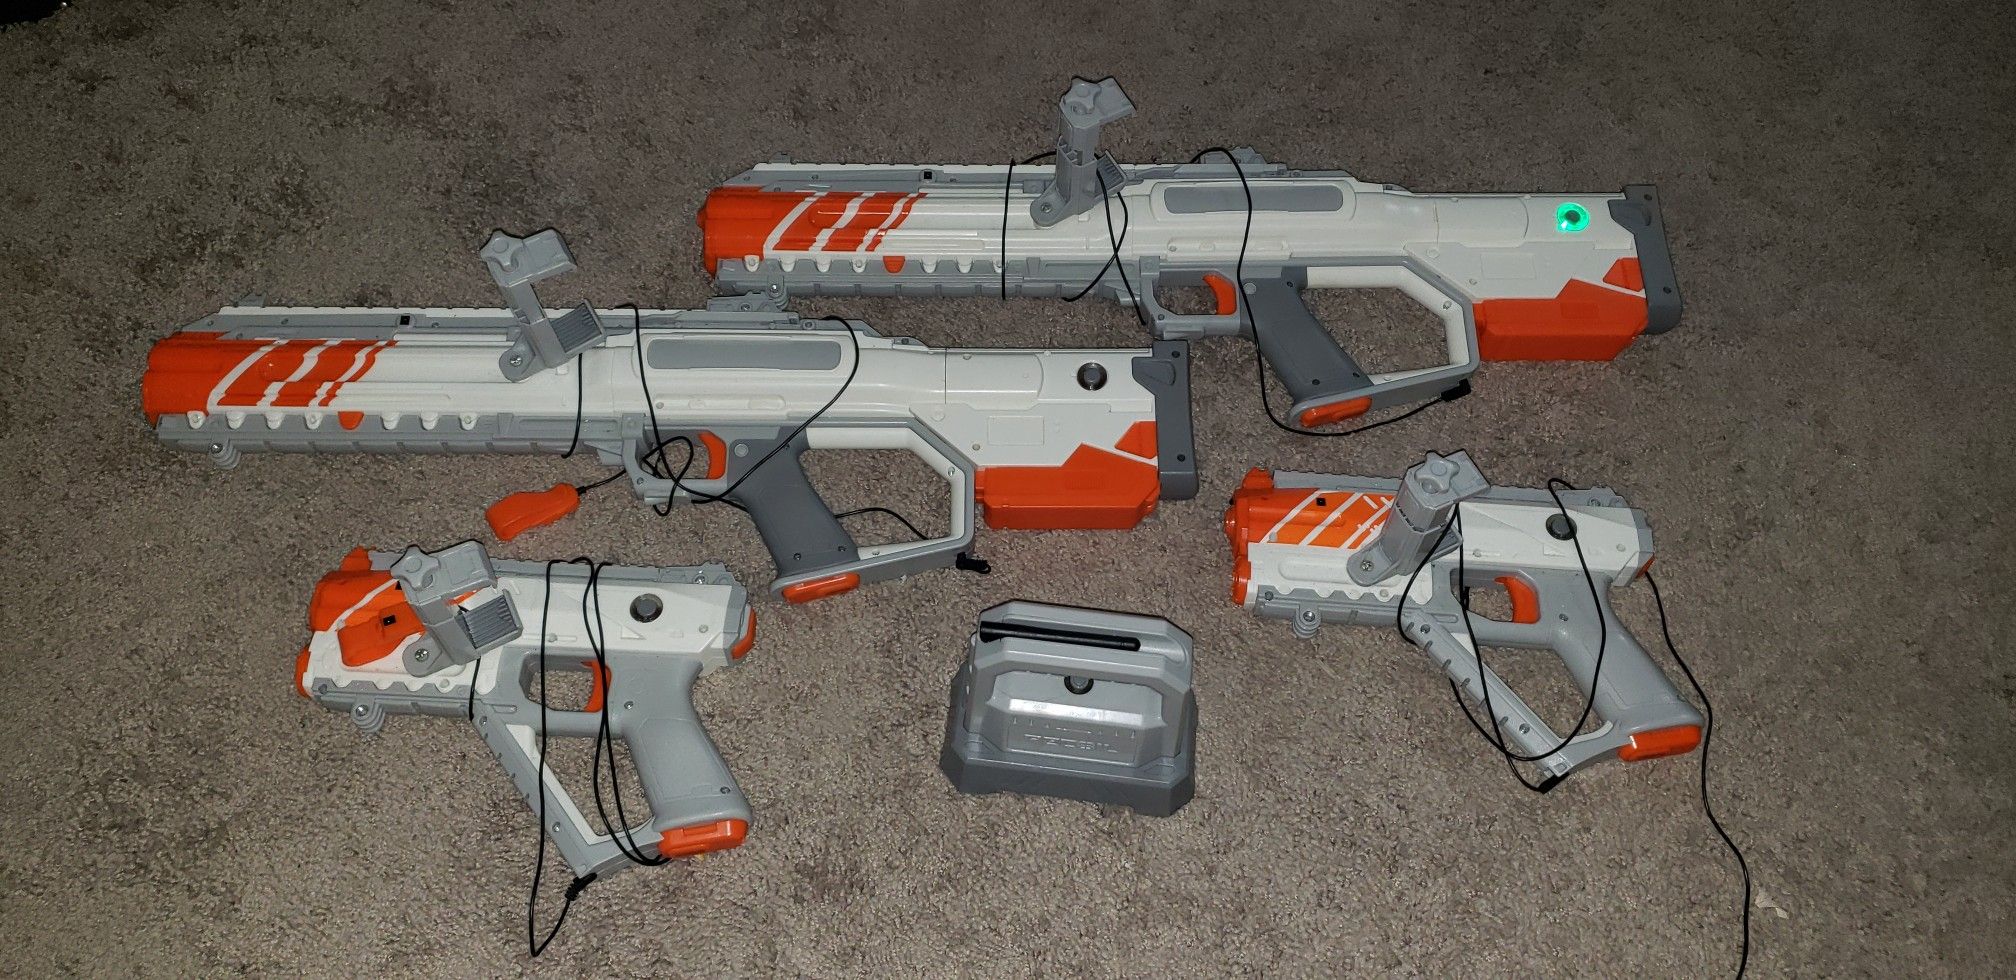 Recoil 4 player laser tag set